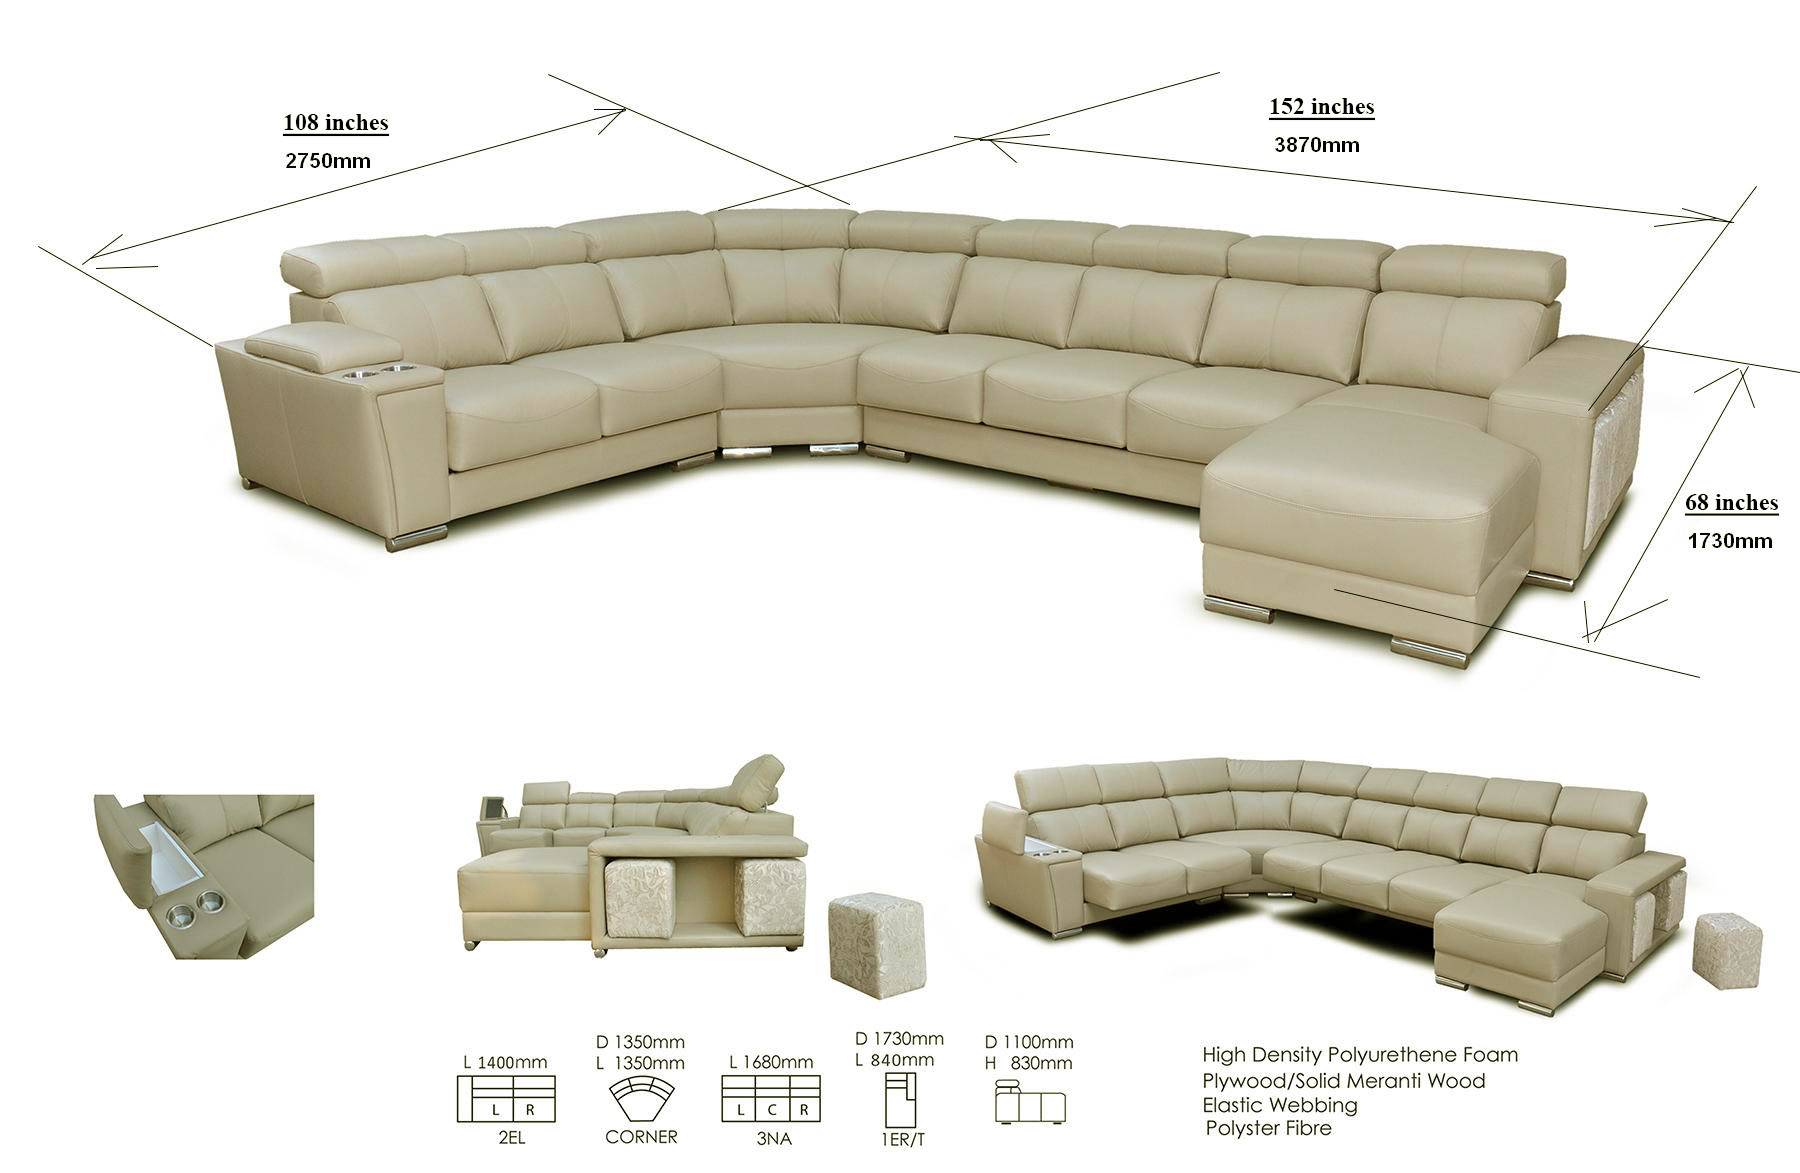 Cream Italian Leather Extra Large Sectional with Cup Holders - Click Image to Close